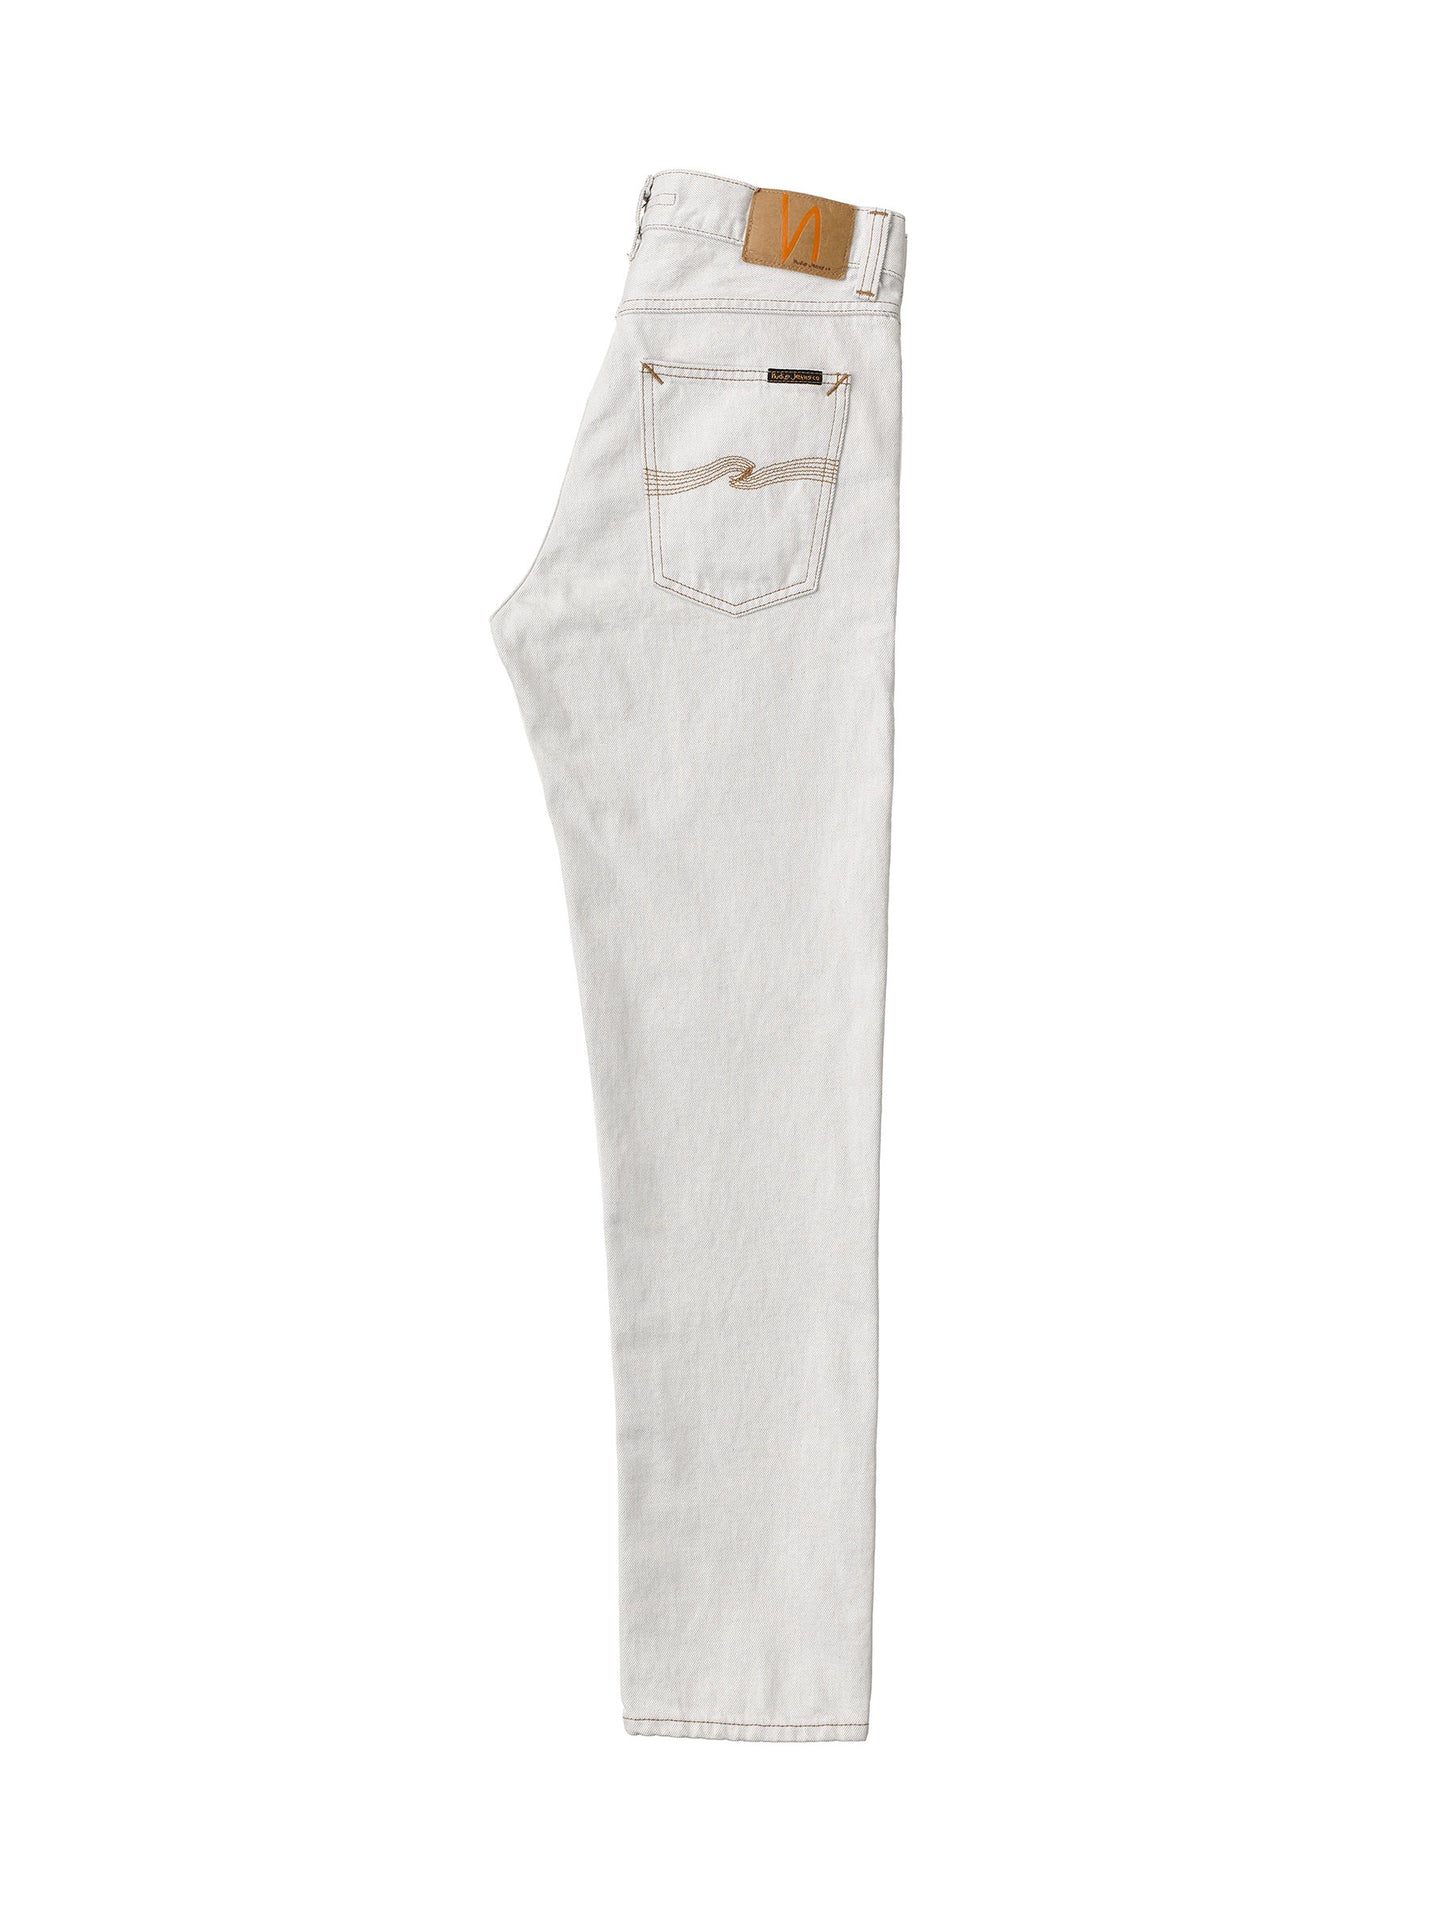 Nudie Jeans Gritty Jackson Jean L30 Clay White